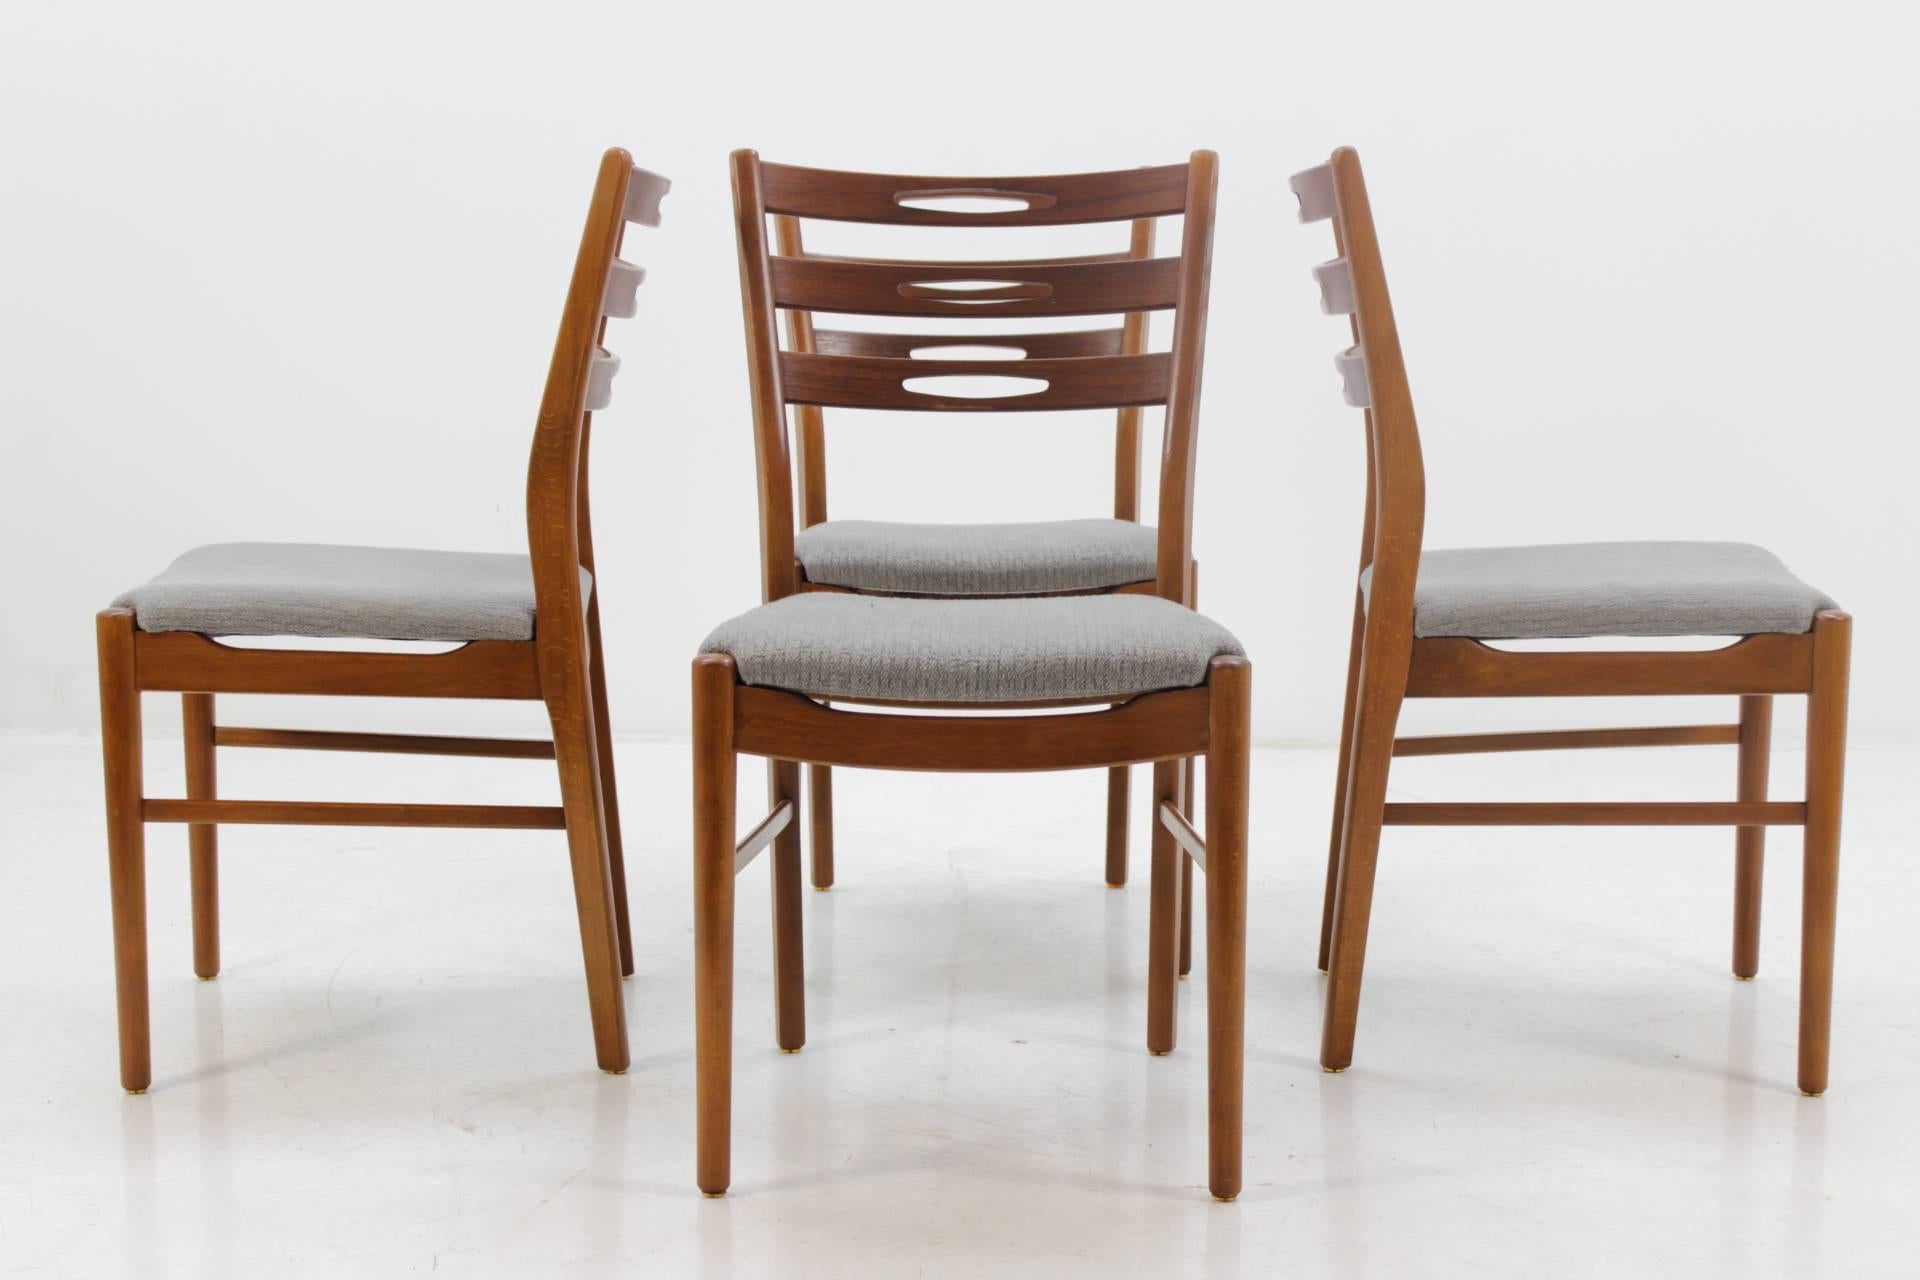 teak chairs for sale